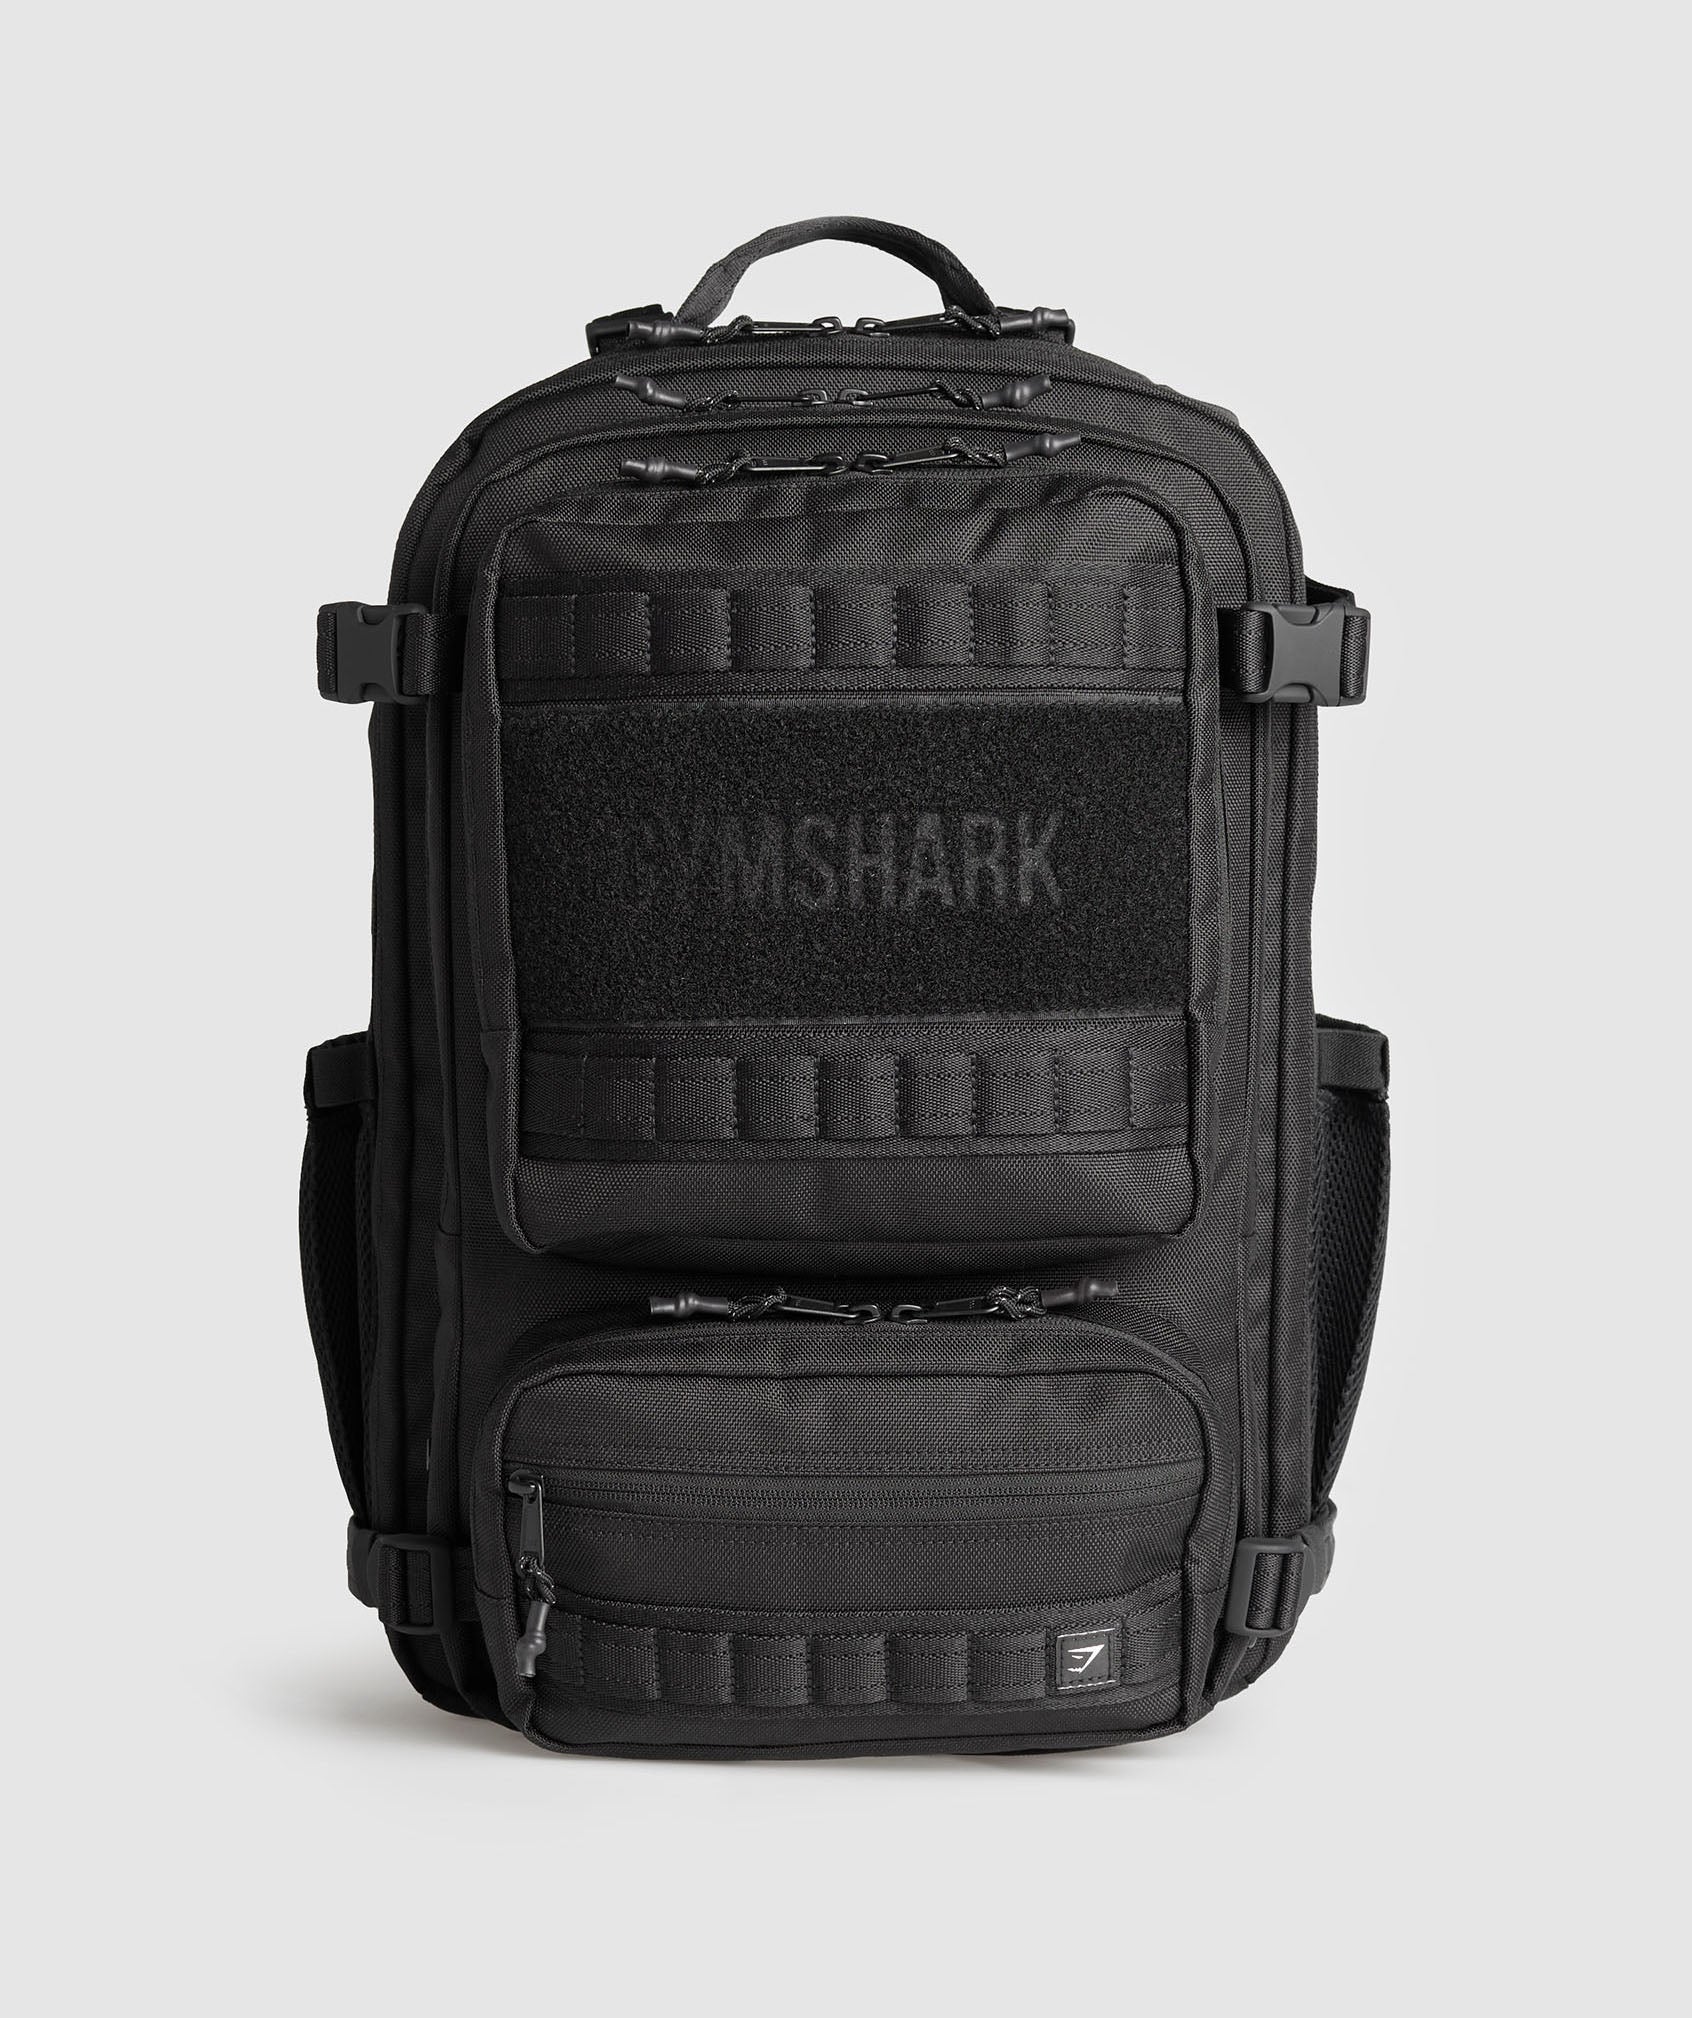 Tactical Backpack in Black - view 1